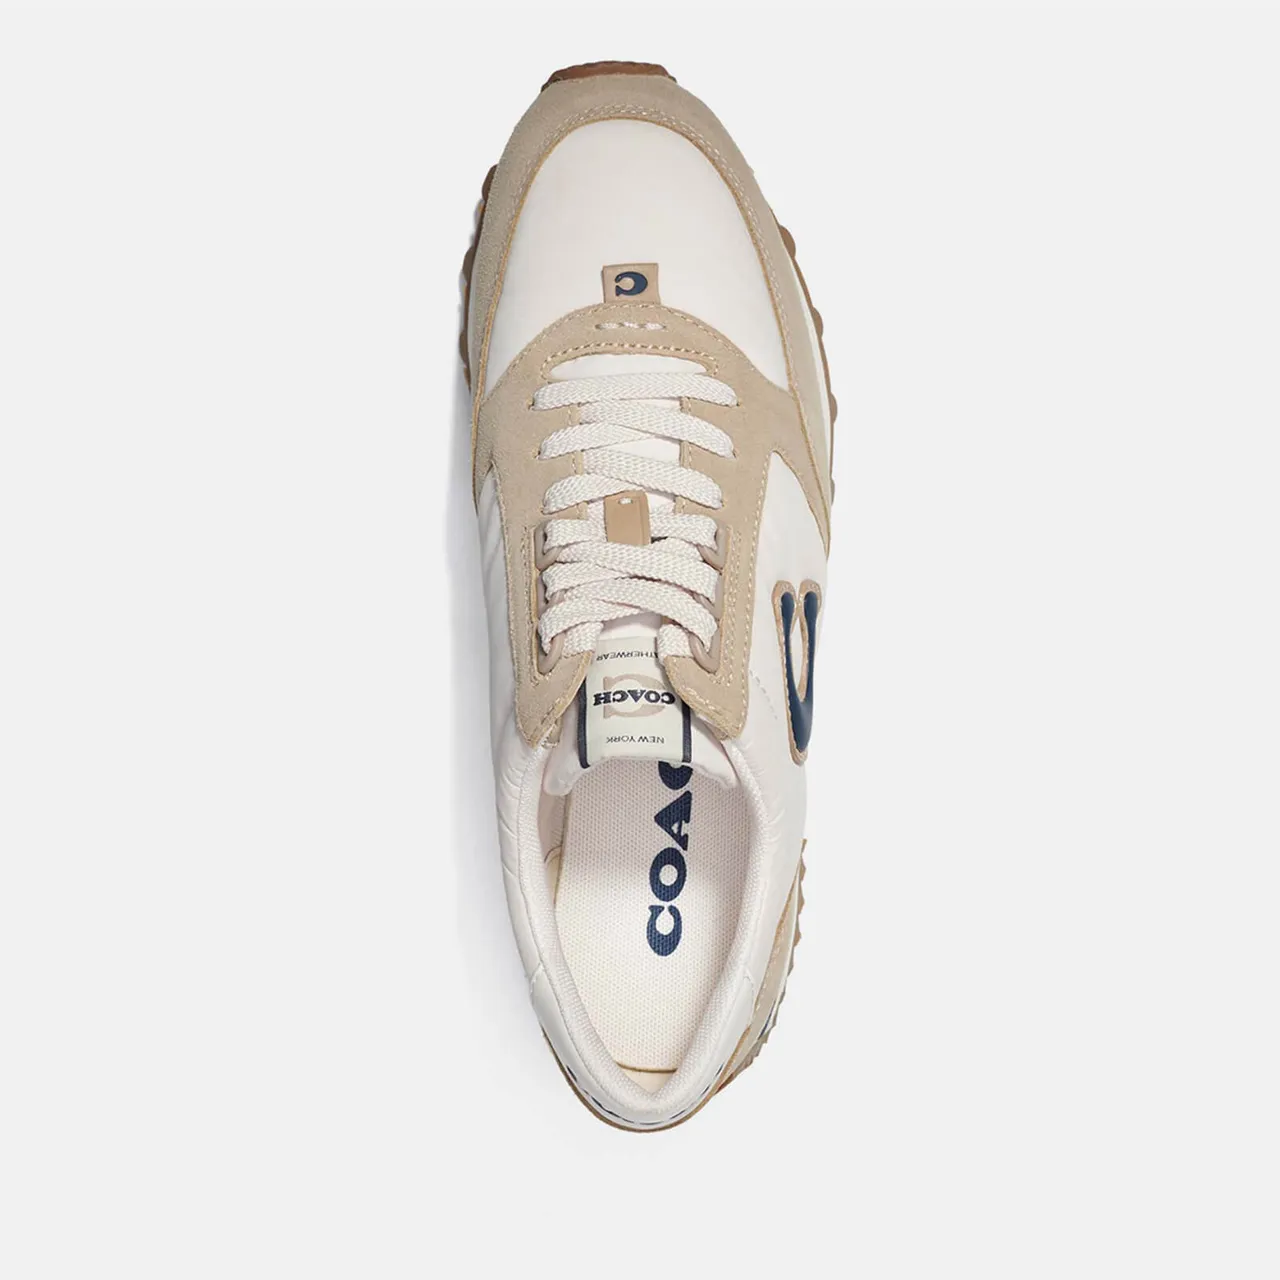 Coach Women's Suede, Shell and Leather Trainers